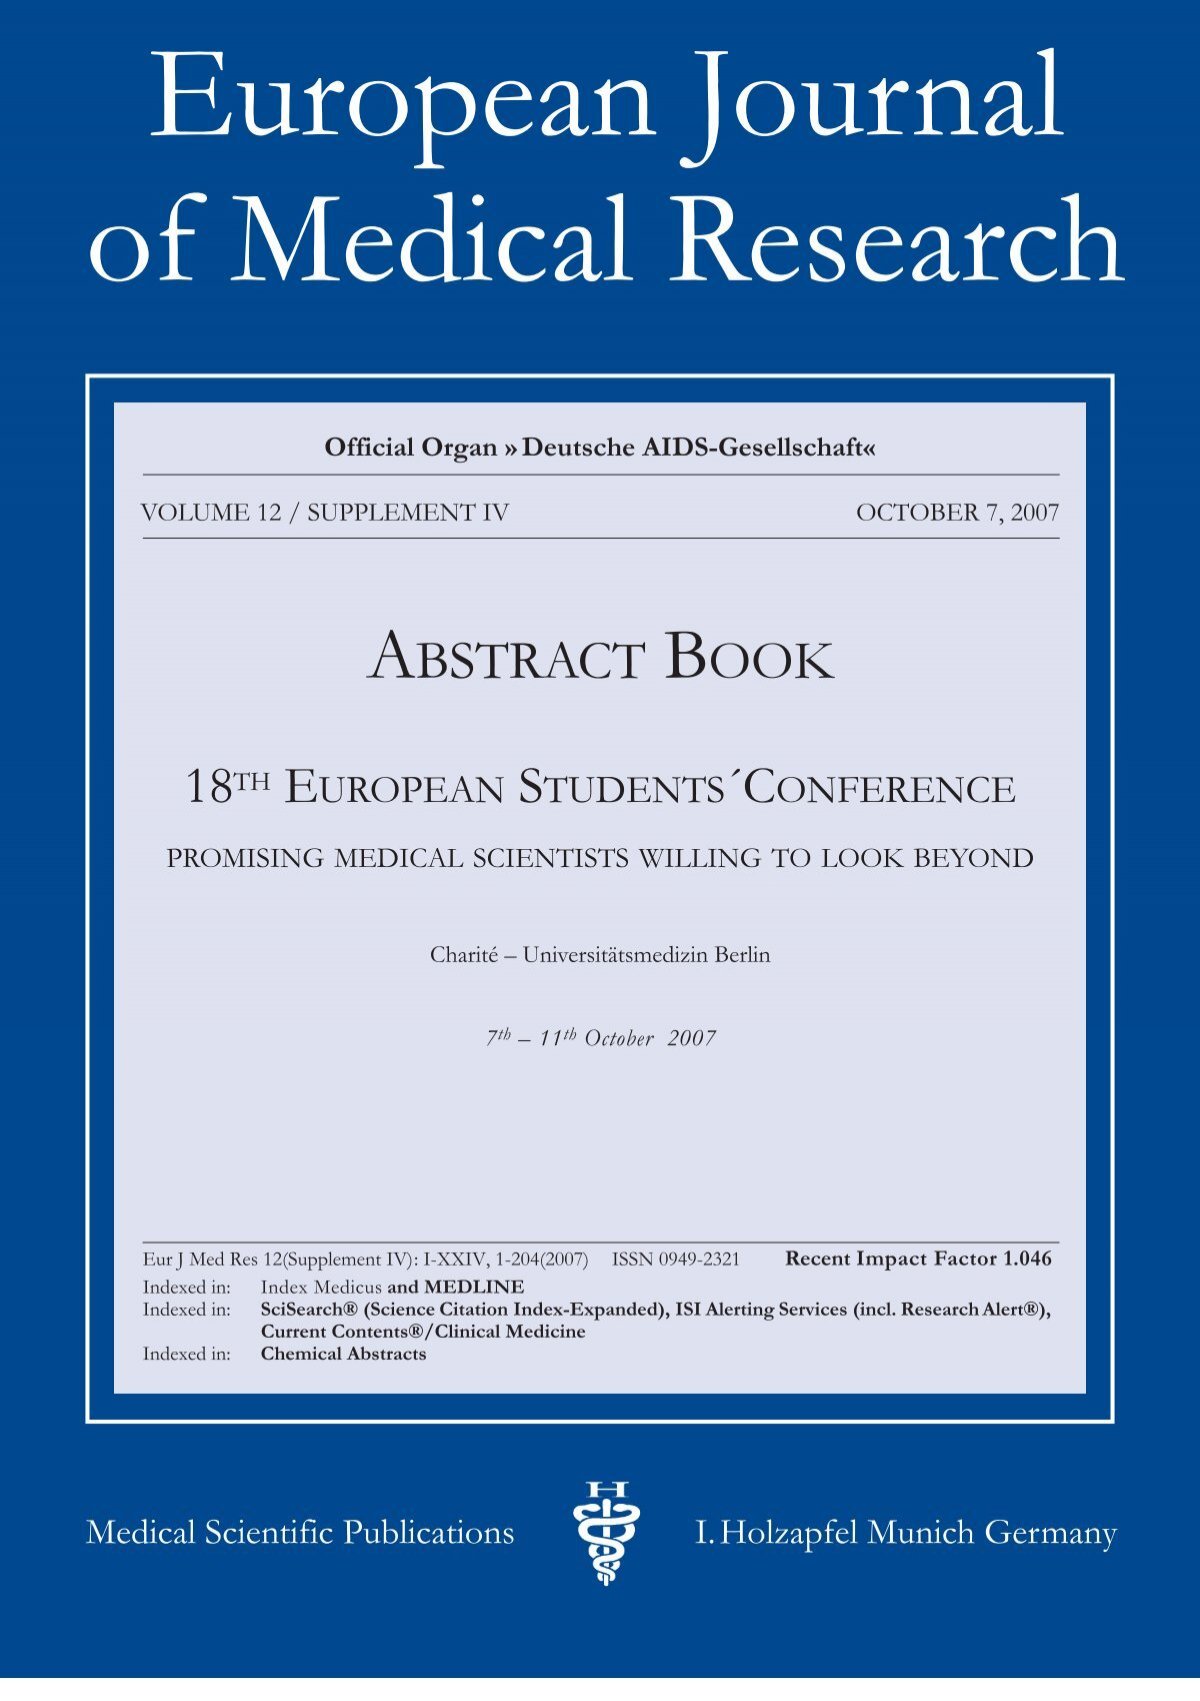 london journal of medical research (ljmhr)